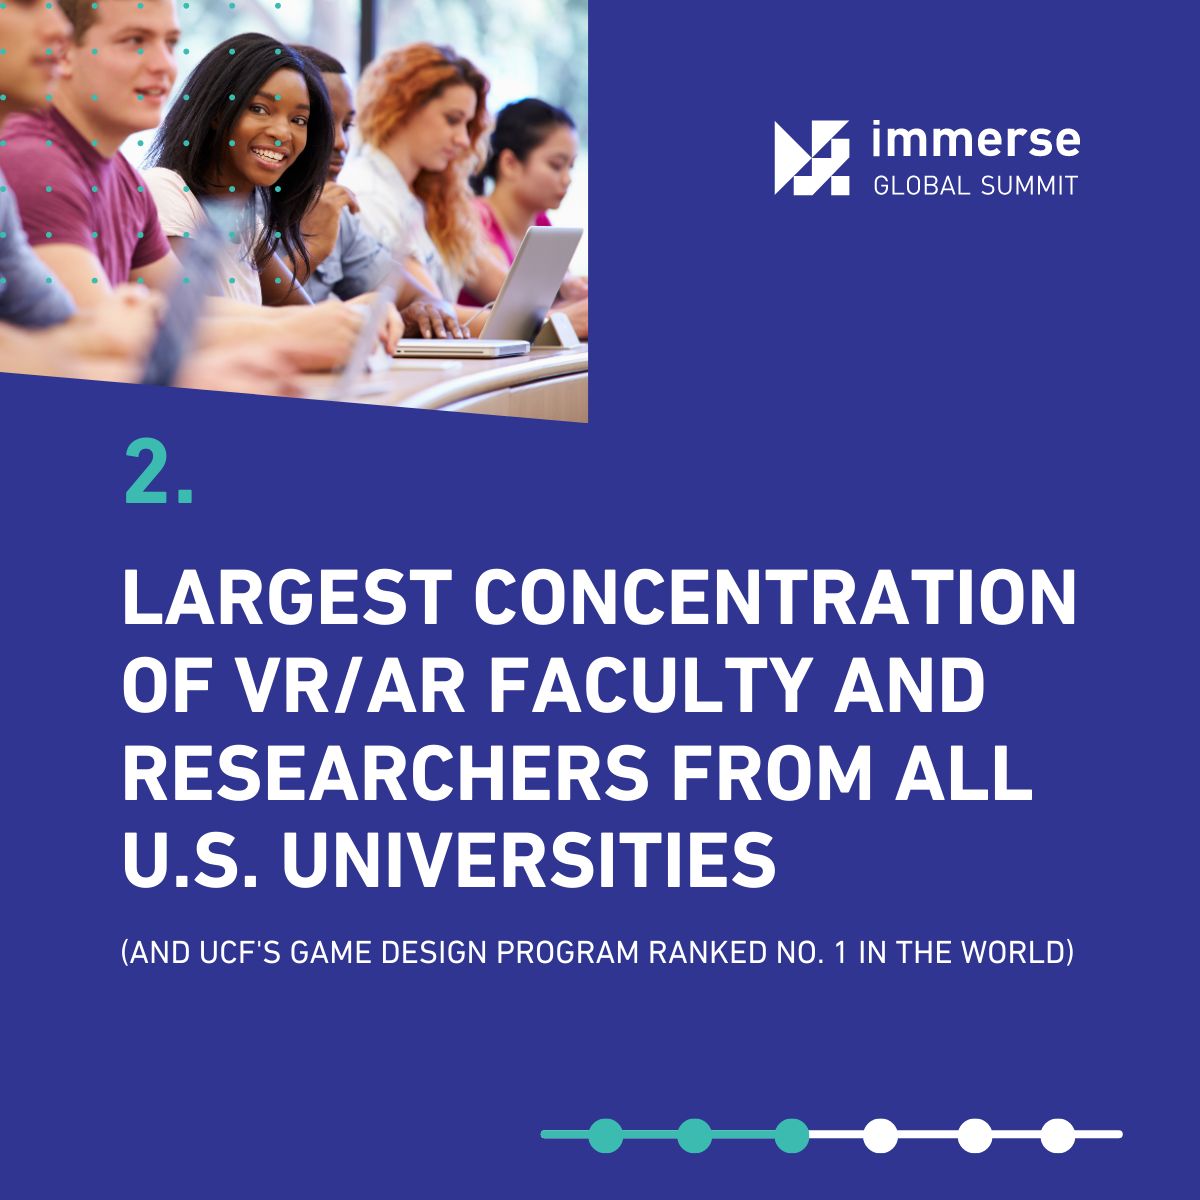 DID YOU KNOW?  Don't miss out and join us in Orlando Oct 17-19 immerseglobalsummit.com

#IGSorlando #education #research